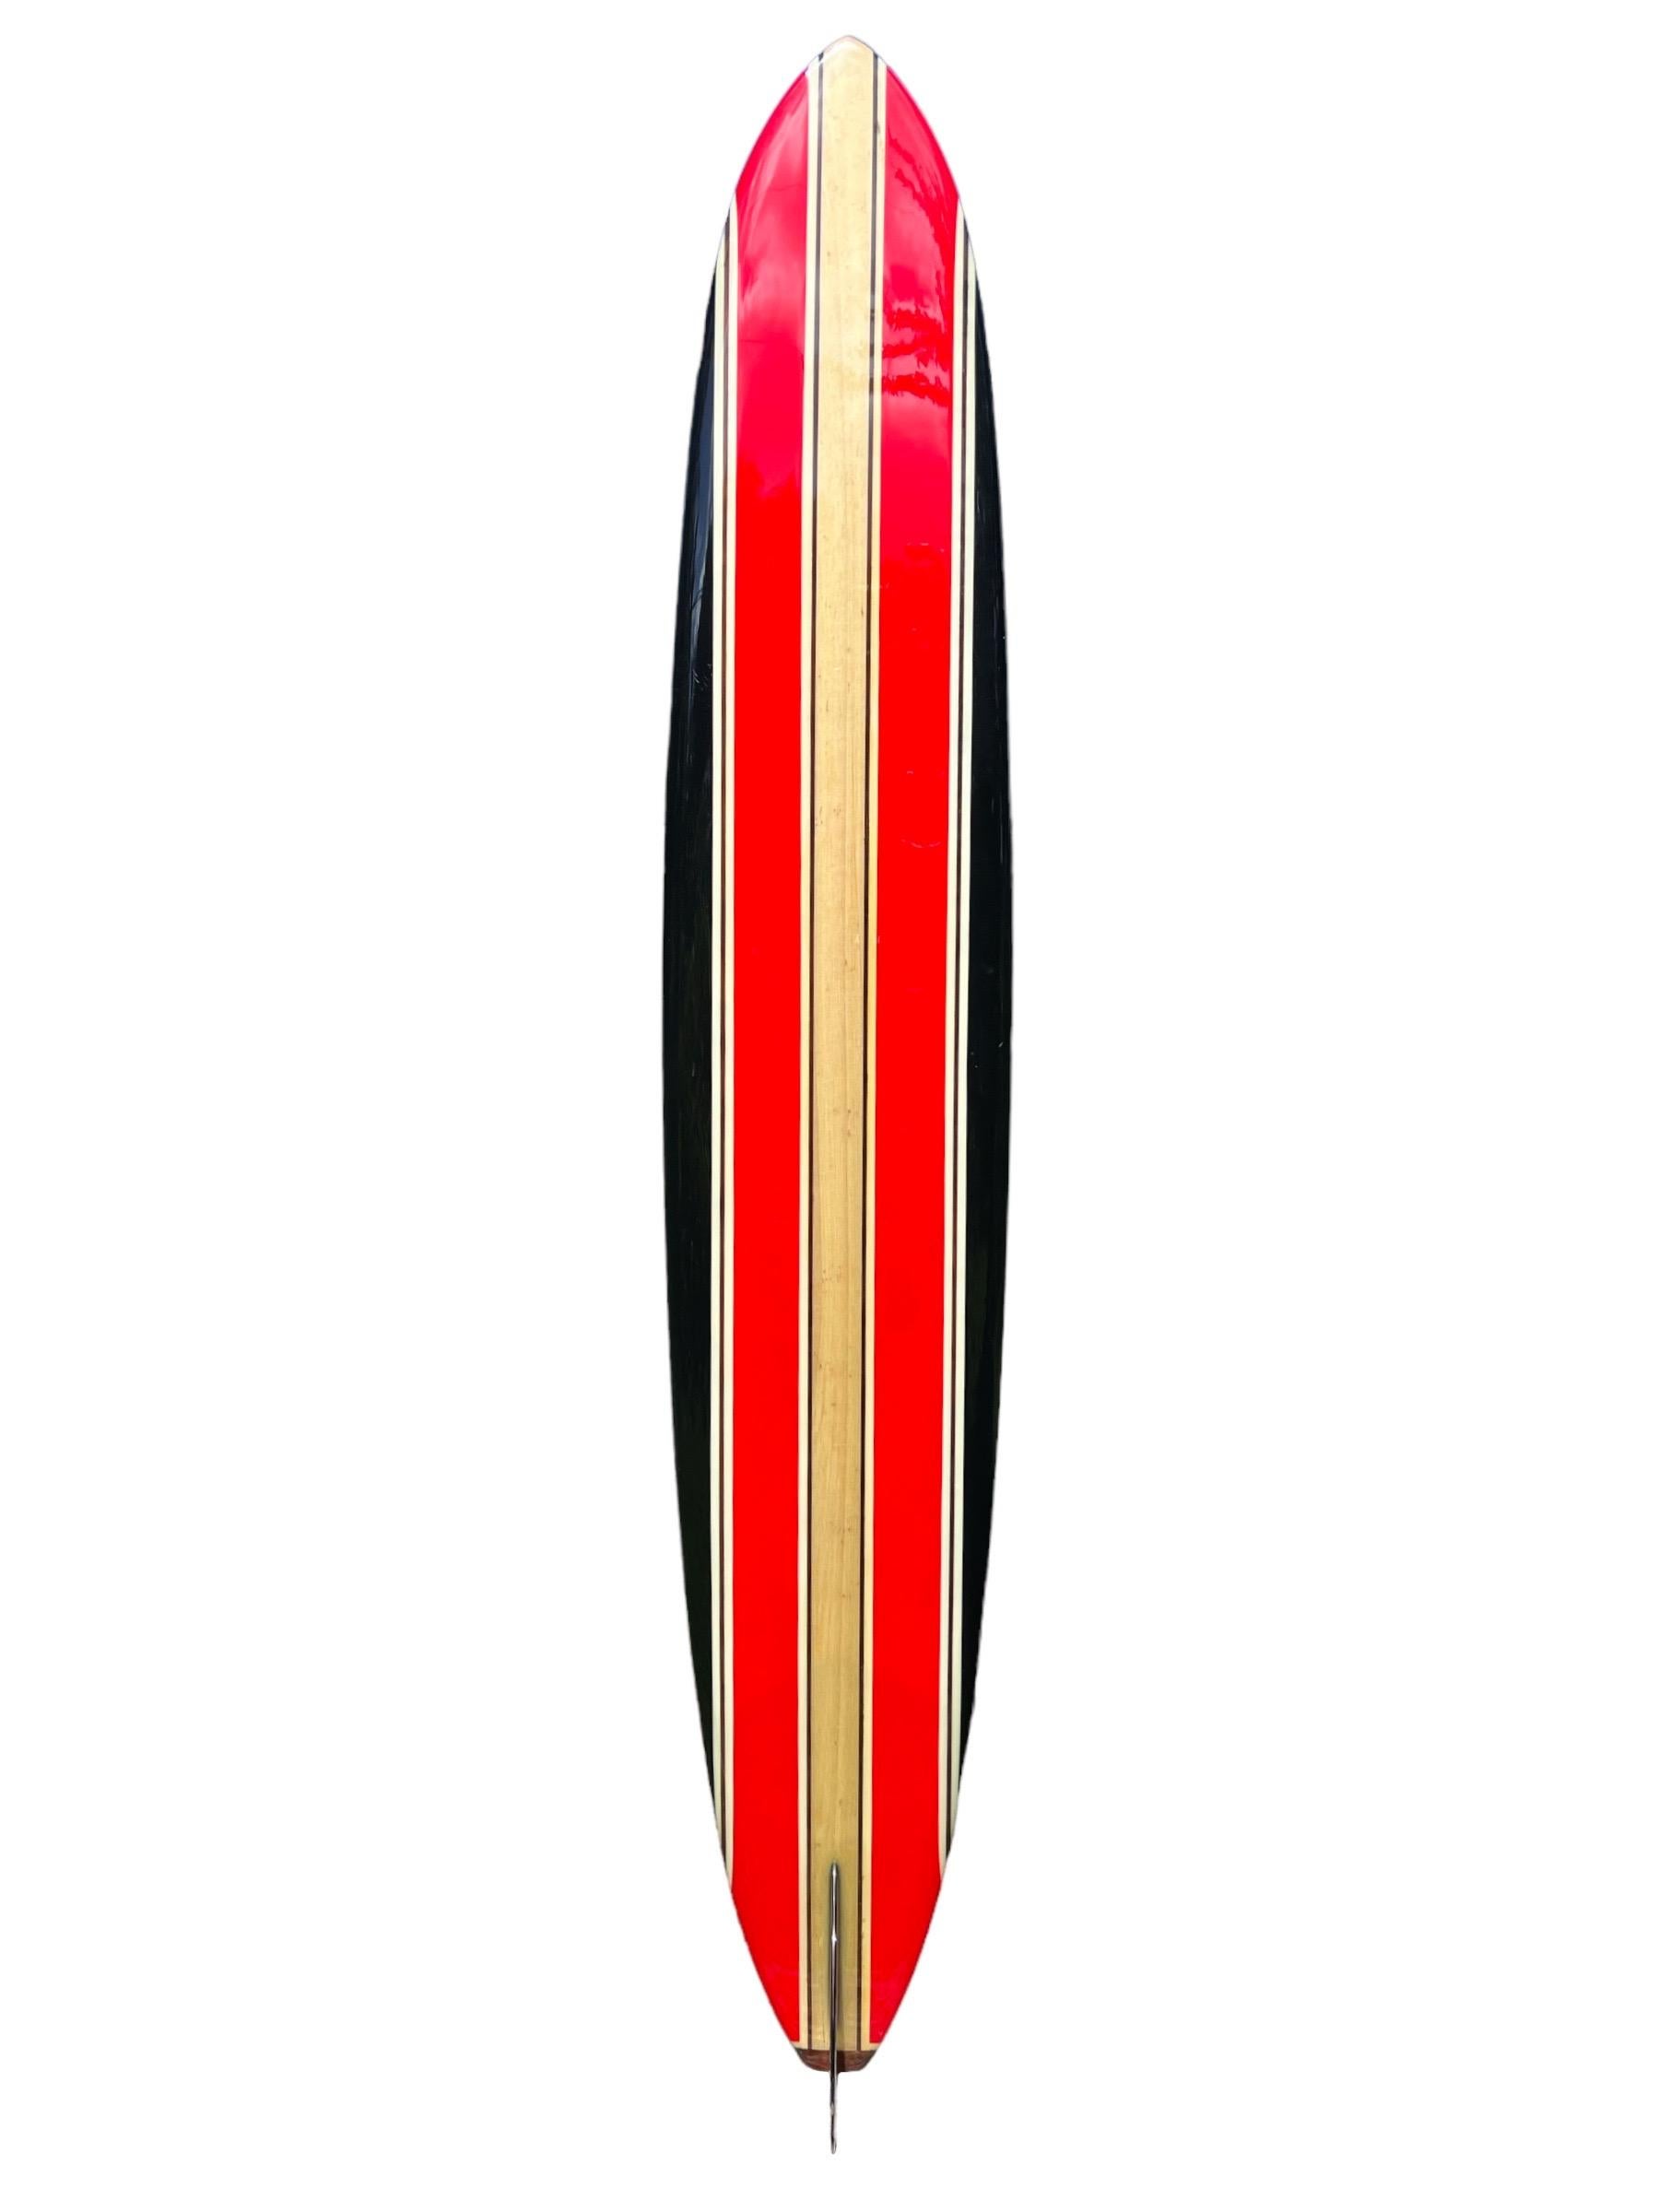 Mid-1960s Vintage Inter Island Surf Shop Big Wave Surfboard. Hand made by the late Mike Diffenderfer (1937-2002). Features a big wave Pipeliner shape design with astounding 4” thick balsa wood center string and 4 complimentary redwood stringers and